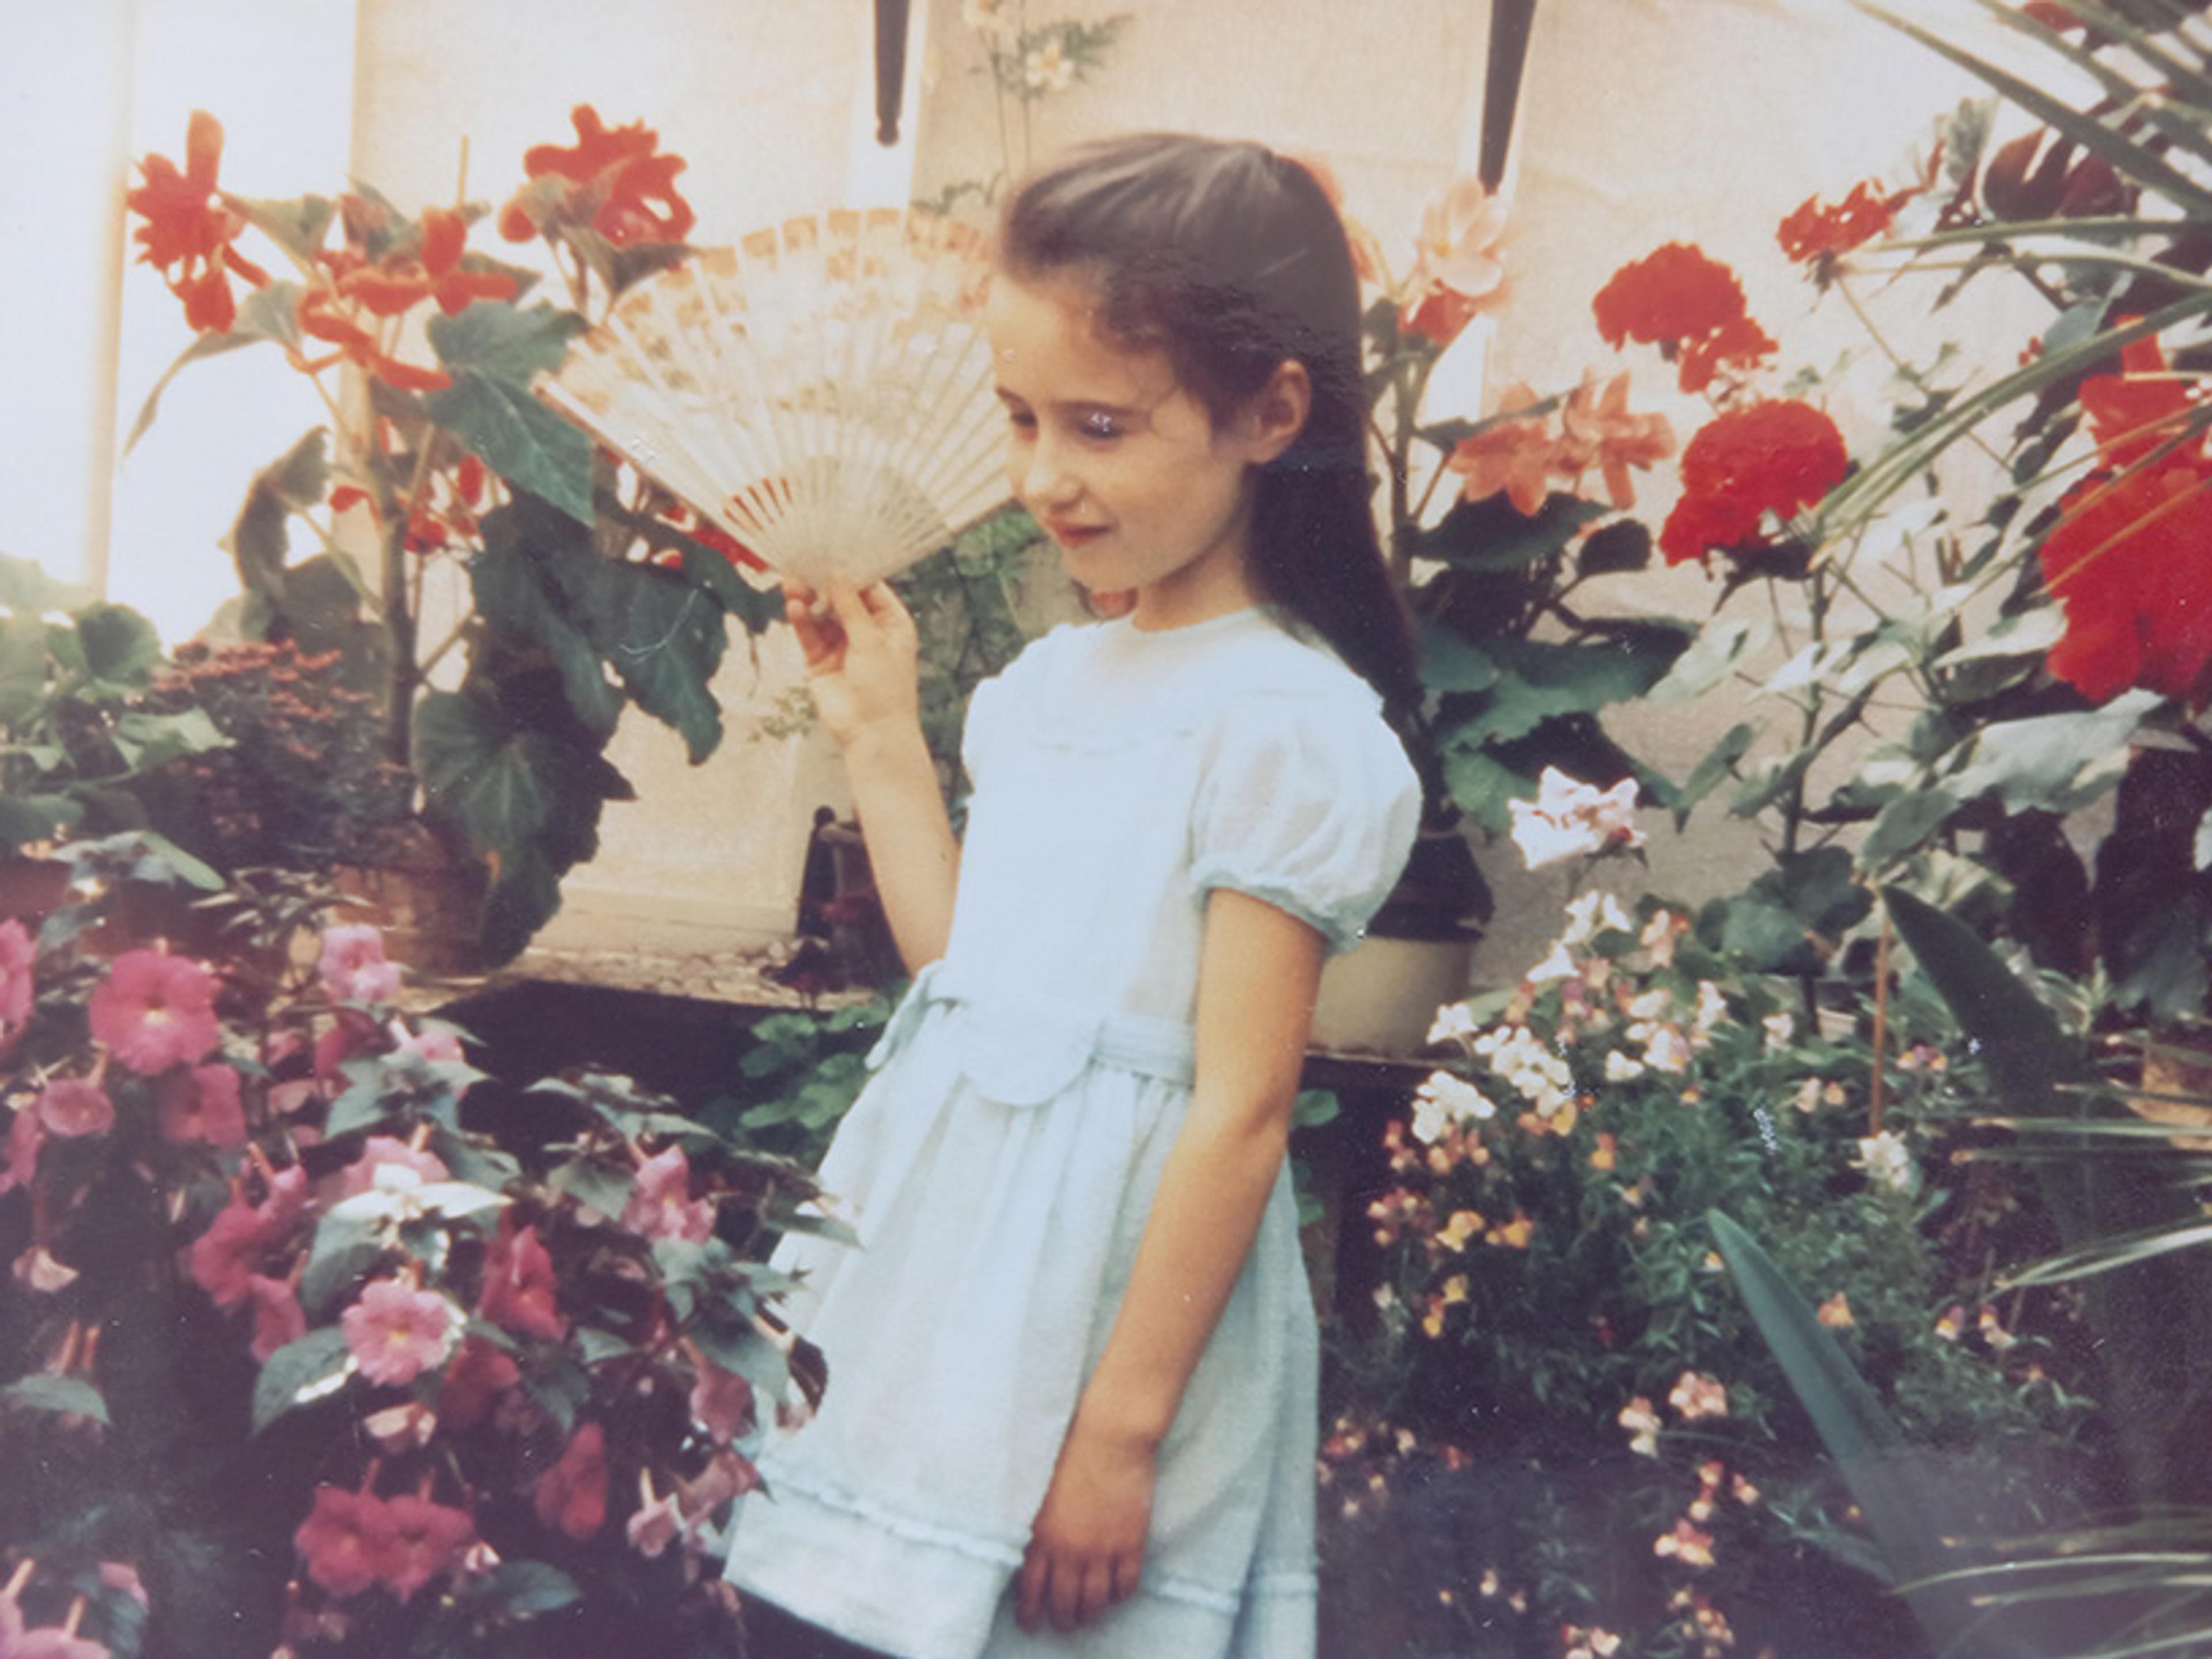 A young girl in a light blue dress holds a fan, standing among colourful flowers in a garden.